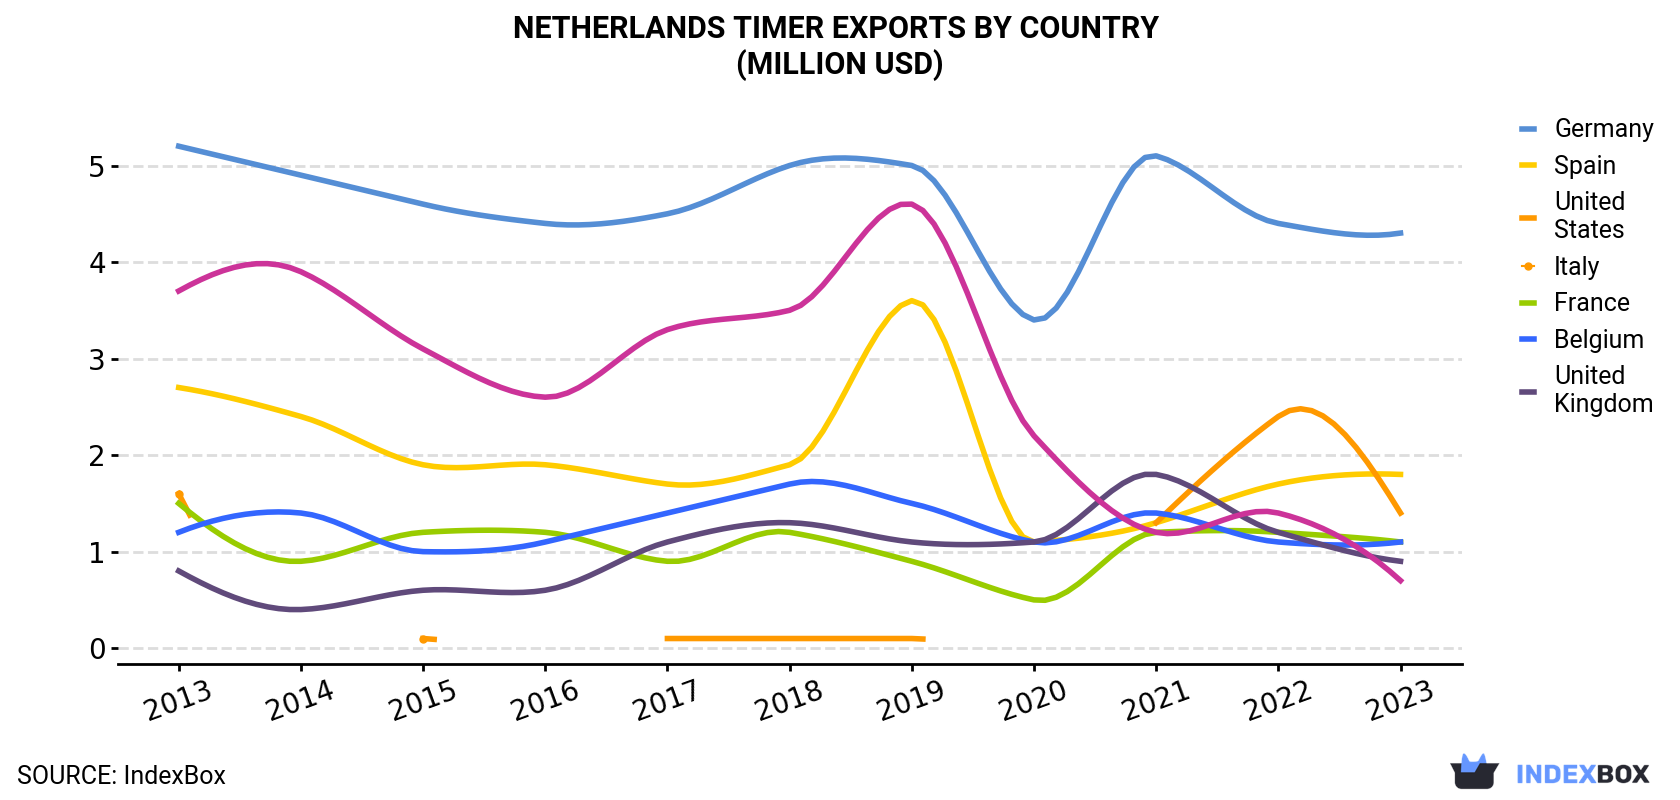 Netherlands Timer Exports By Country (Million USD)